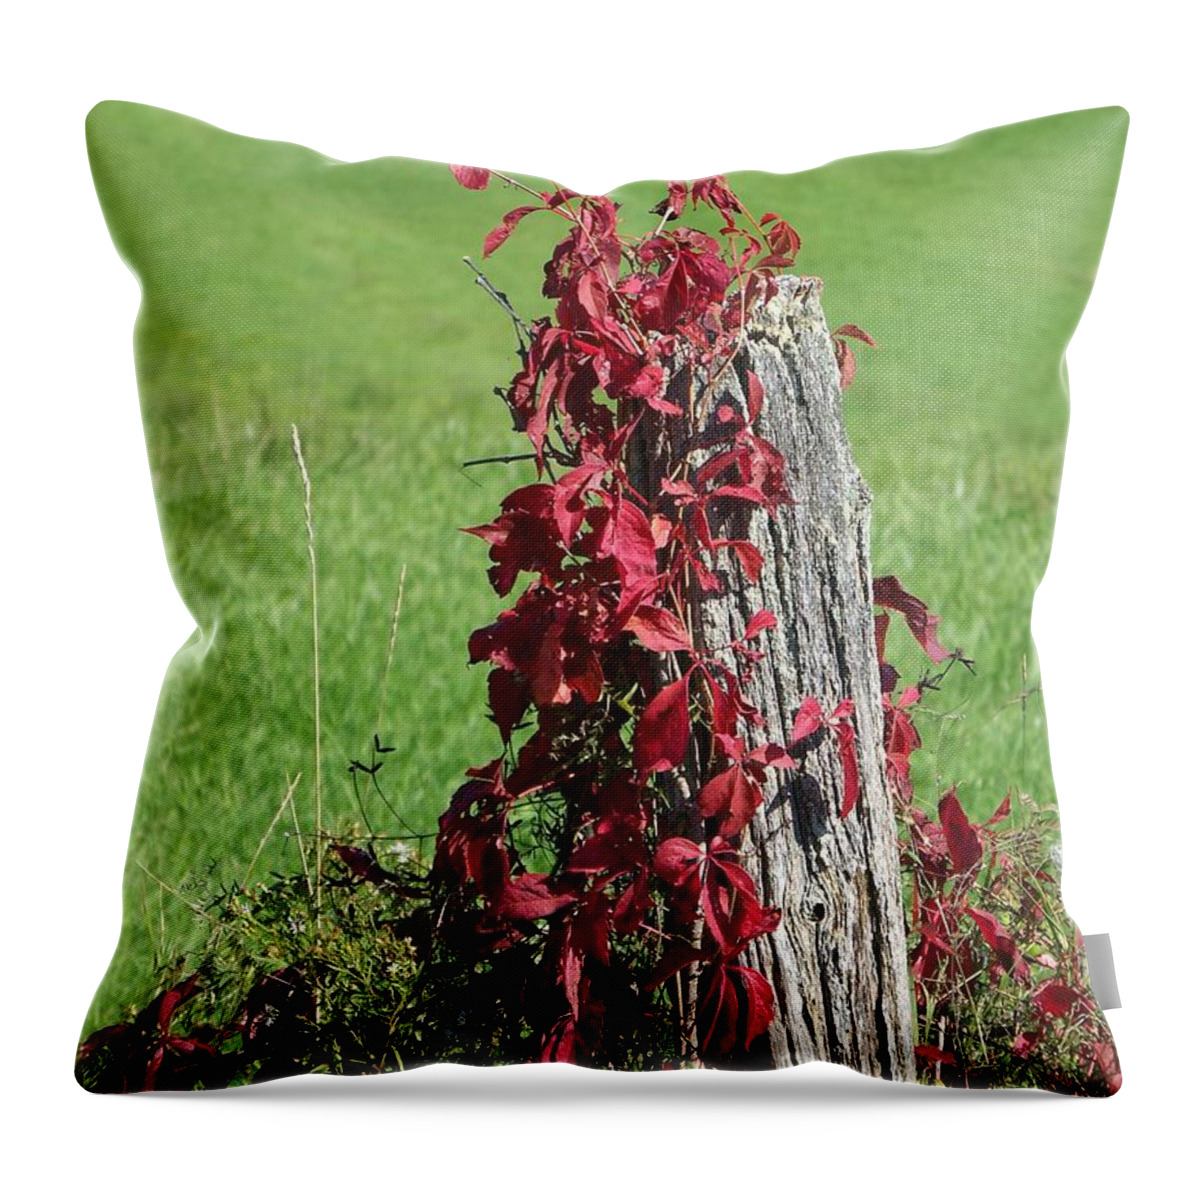 Vine Throw Pillow featuring the photograph The Red Vine - Photograph by Jackie Mueller-Jones